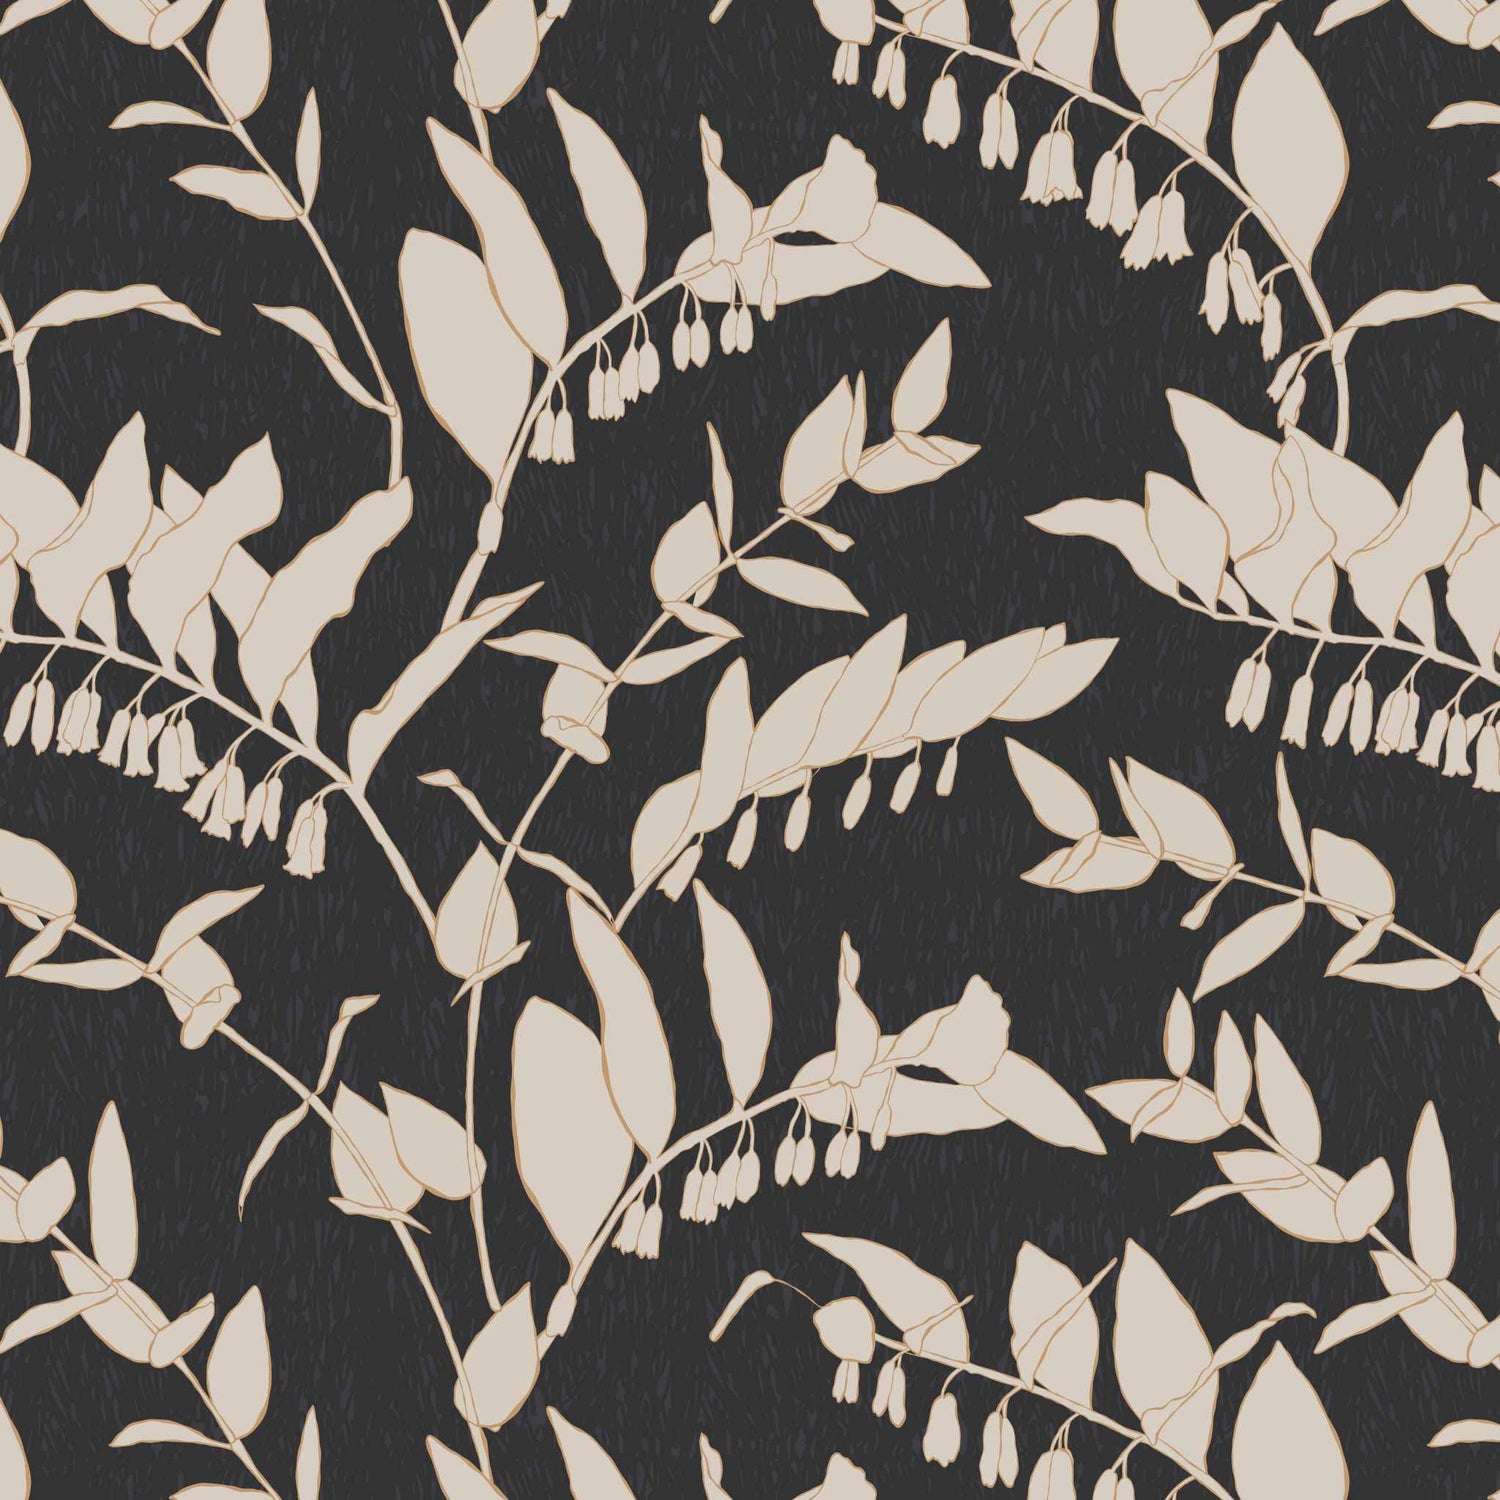 Vines Wallpaper in Charcoal adds an appreciation of understated chicness to any interior, offering a funky and moody essence to any space it graces. Its unassuming yet stylish design is perfect for those who value subtlety and sophistication.